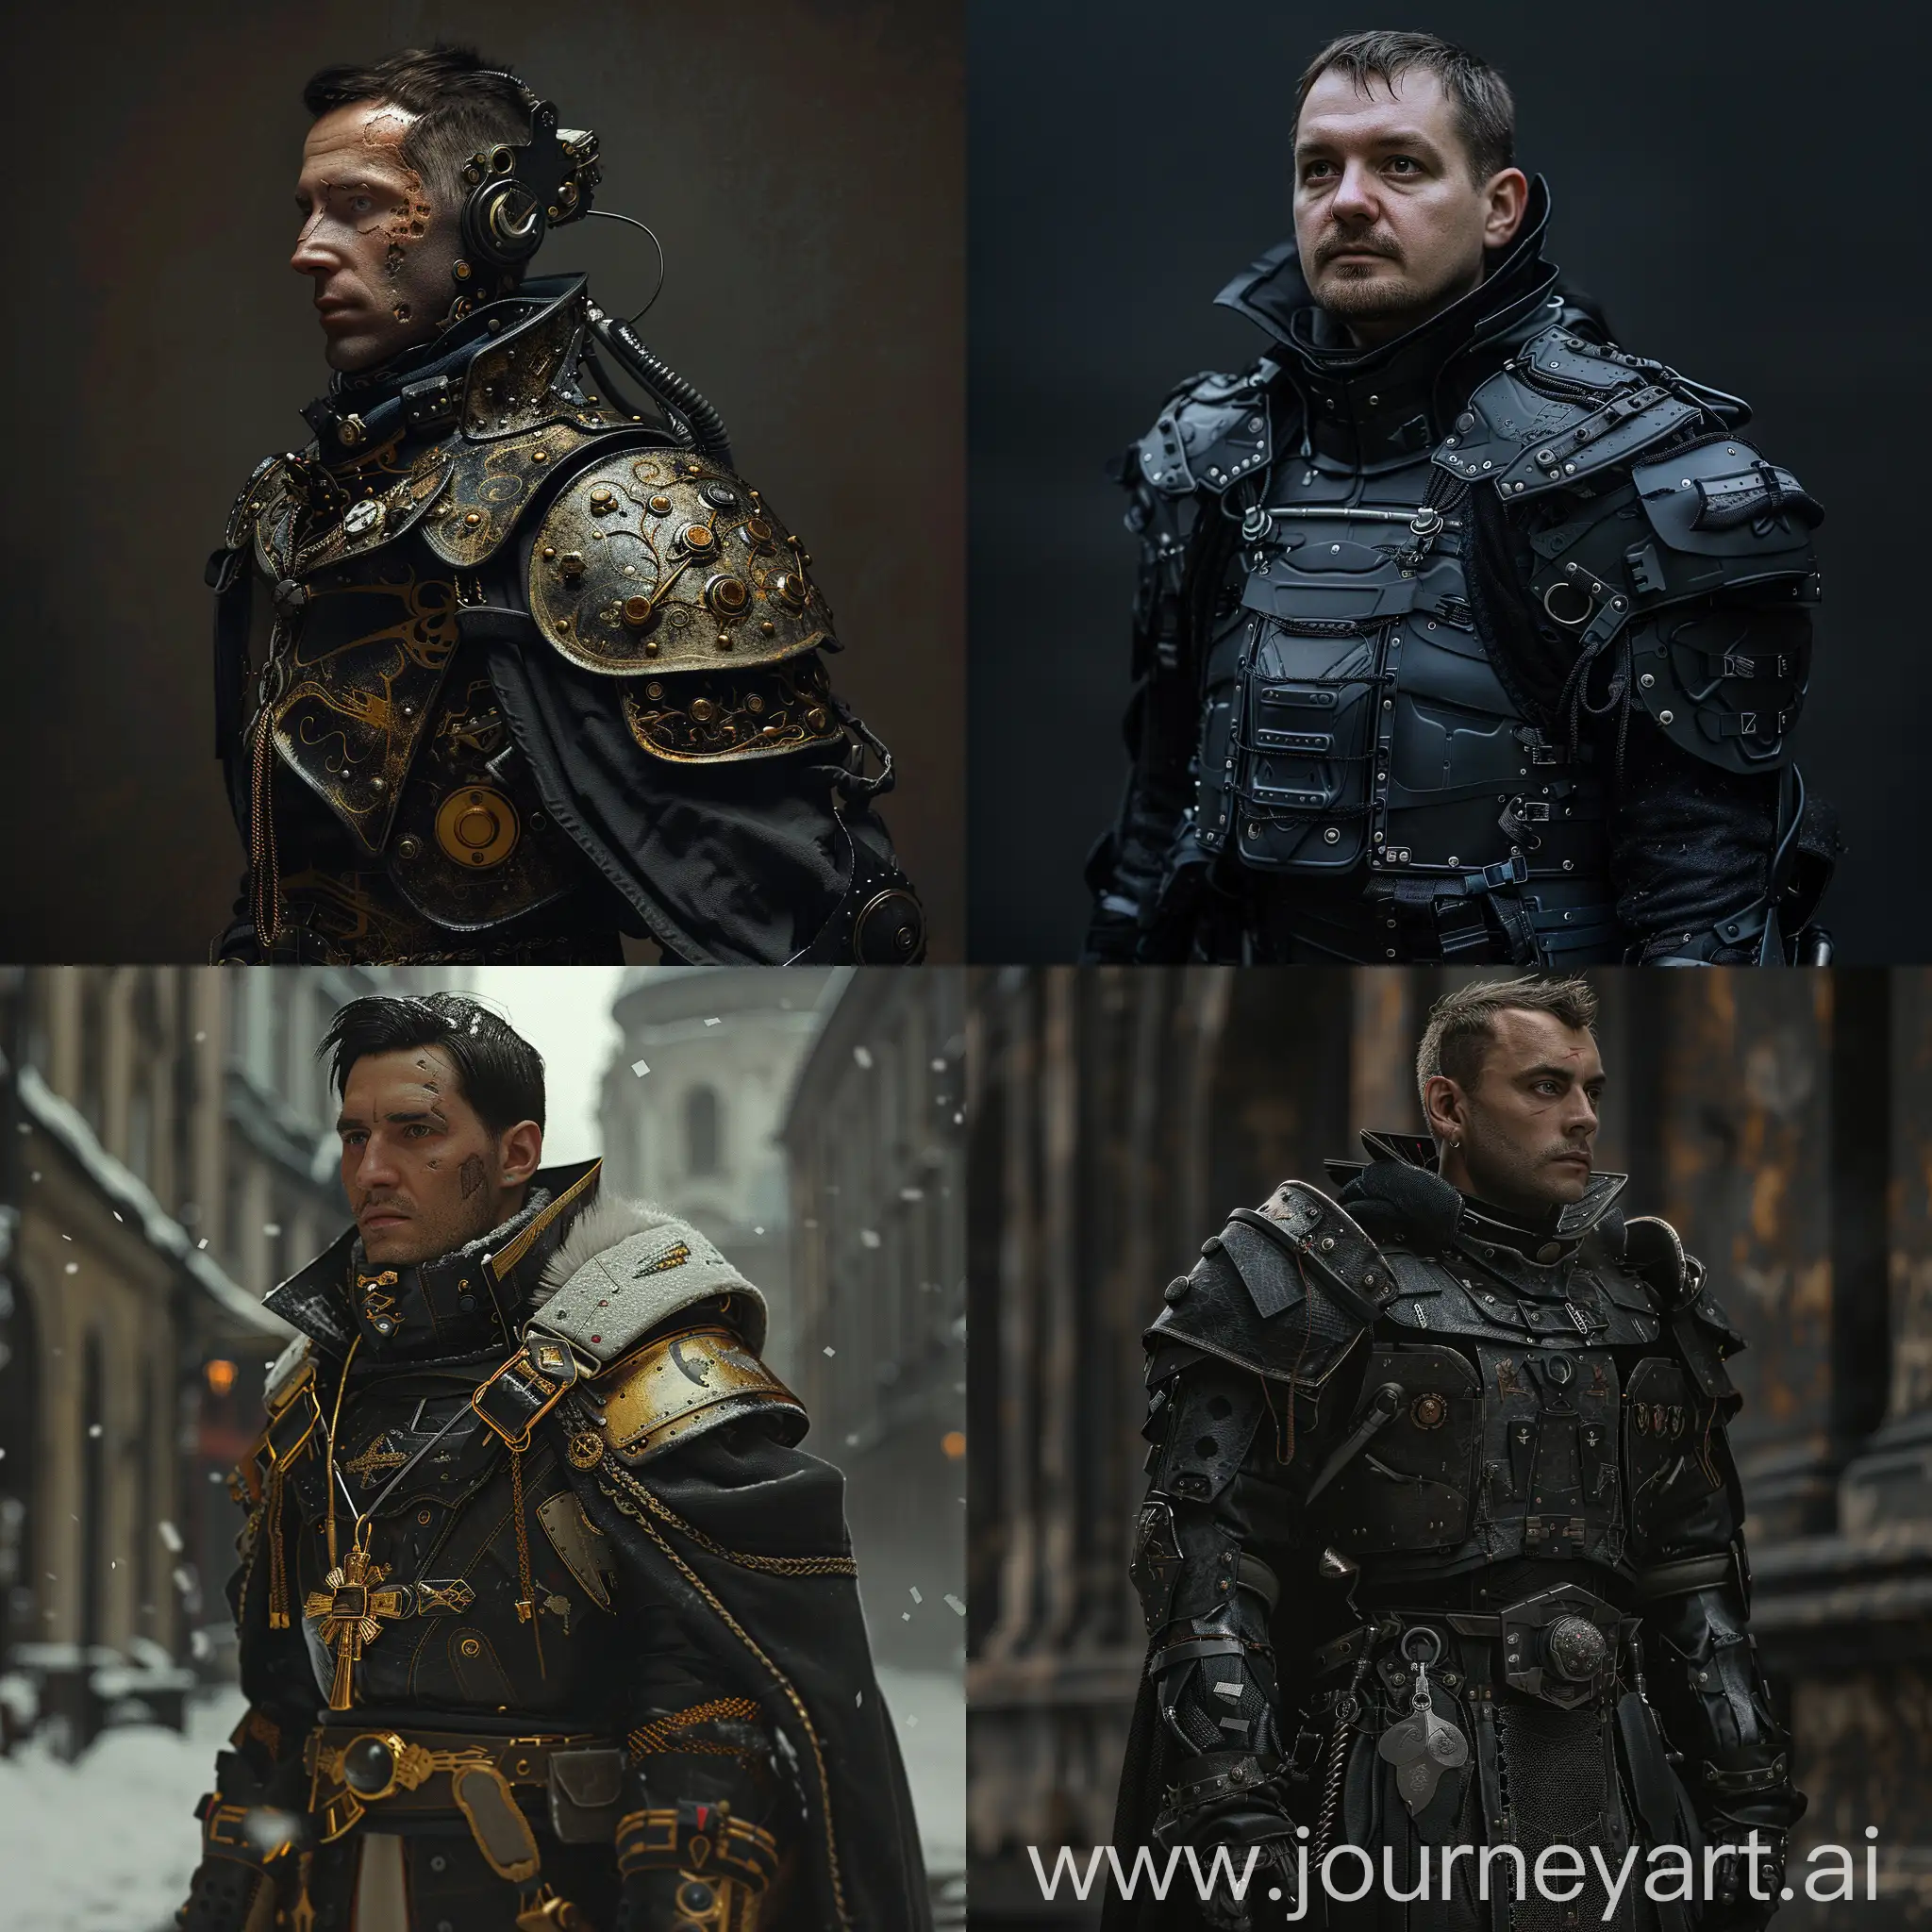 Cyberpunk-Armor-in-Russian-Empire-Style-Clothing